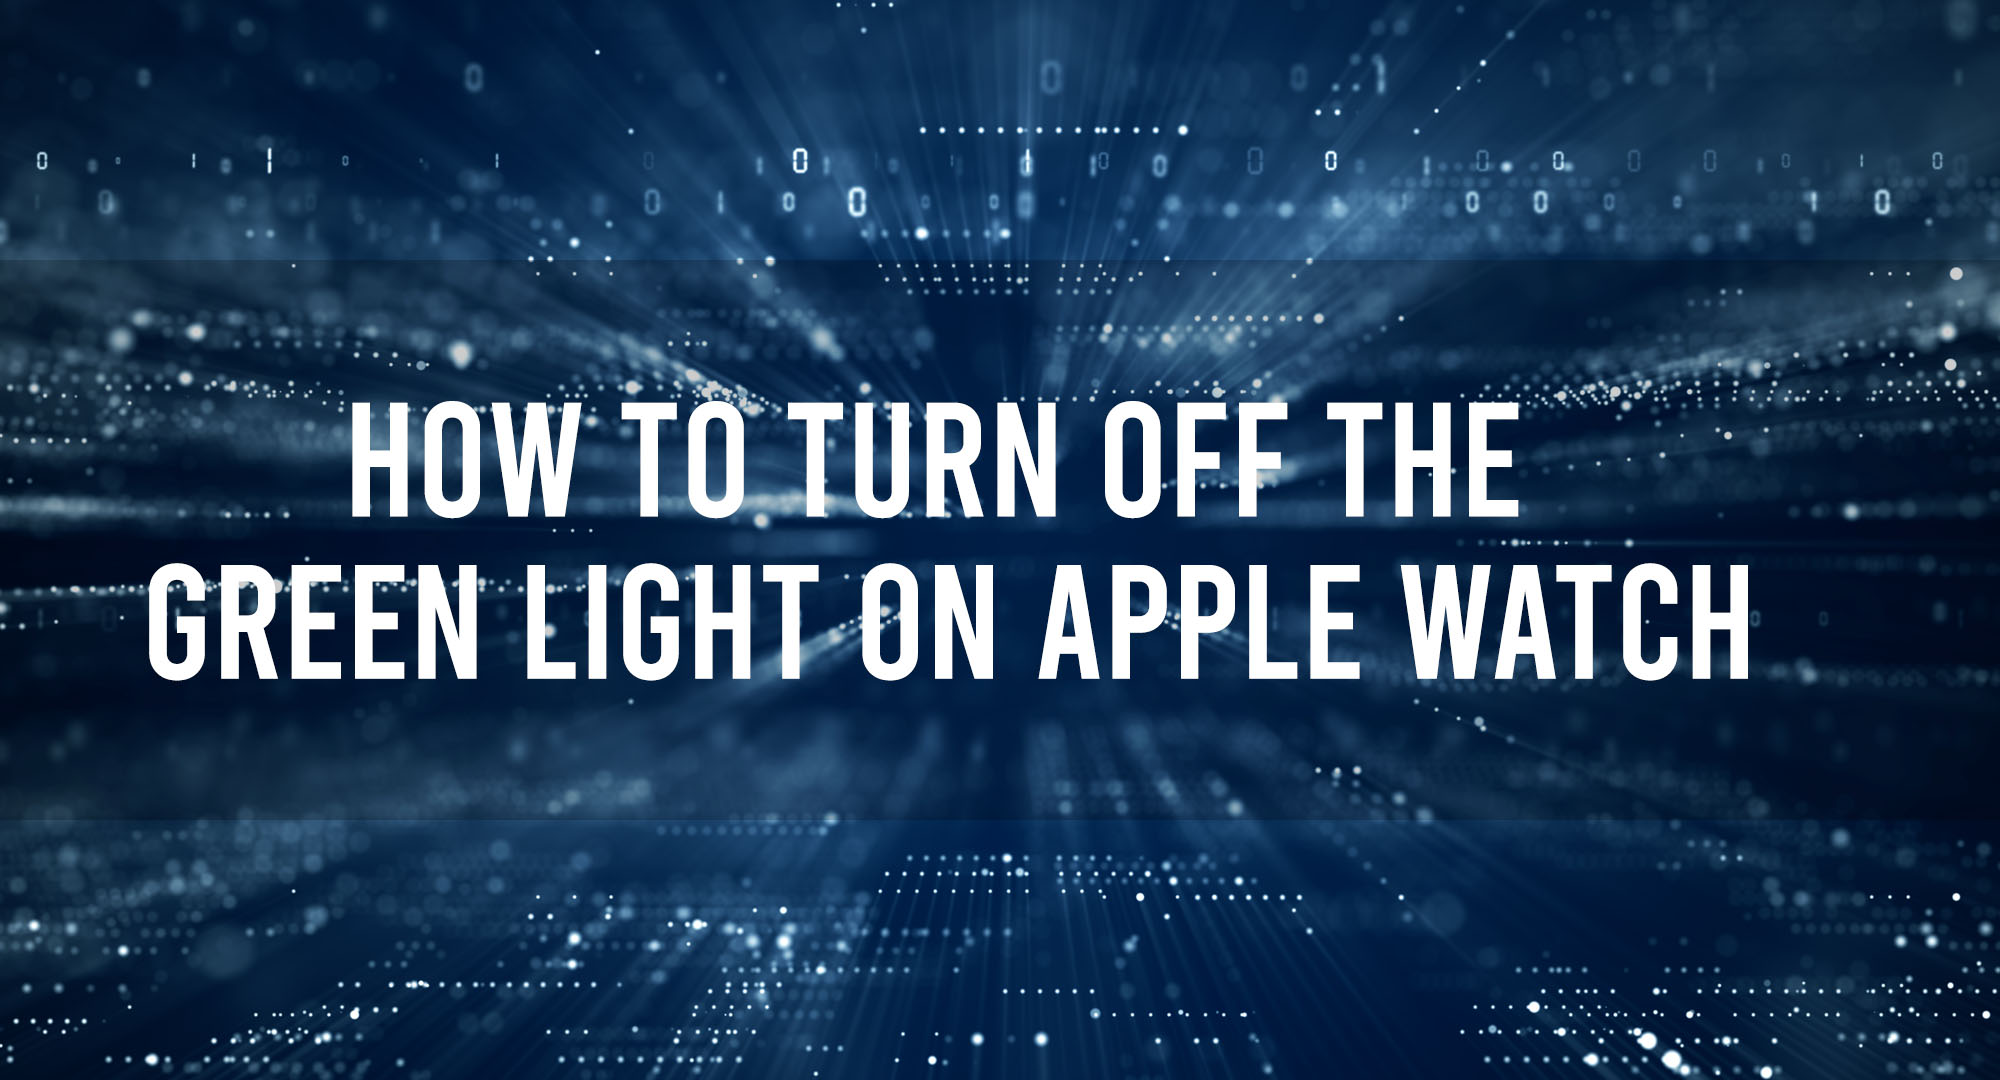 How to turn off the green light on apple watch